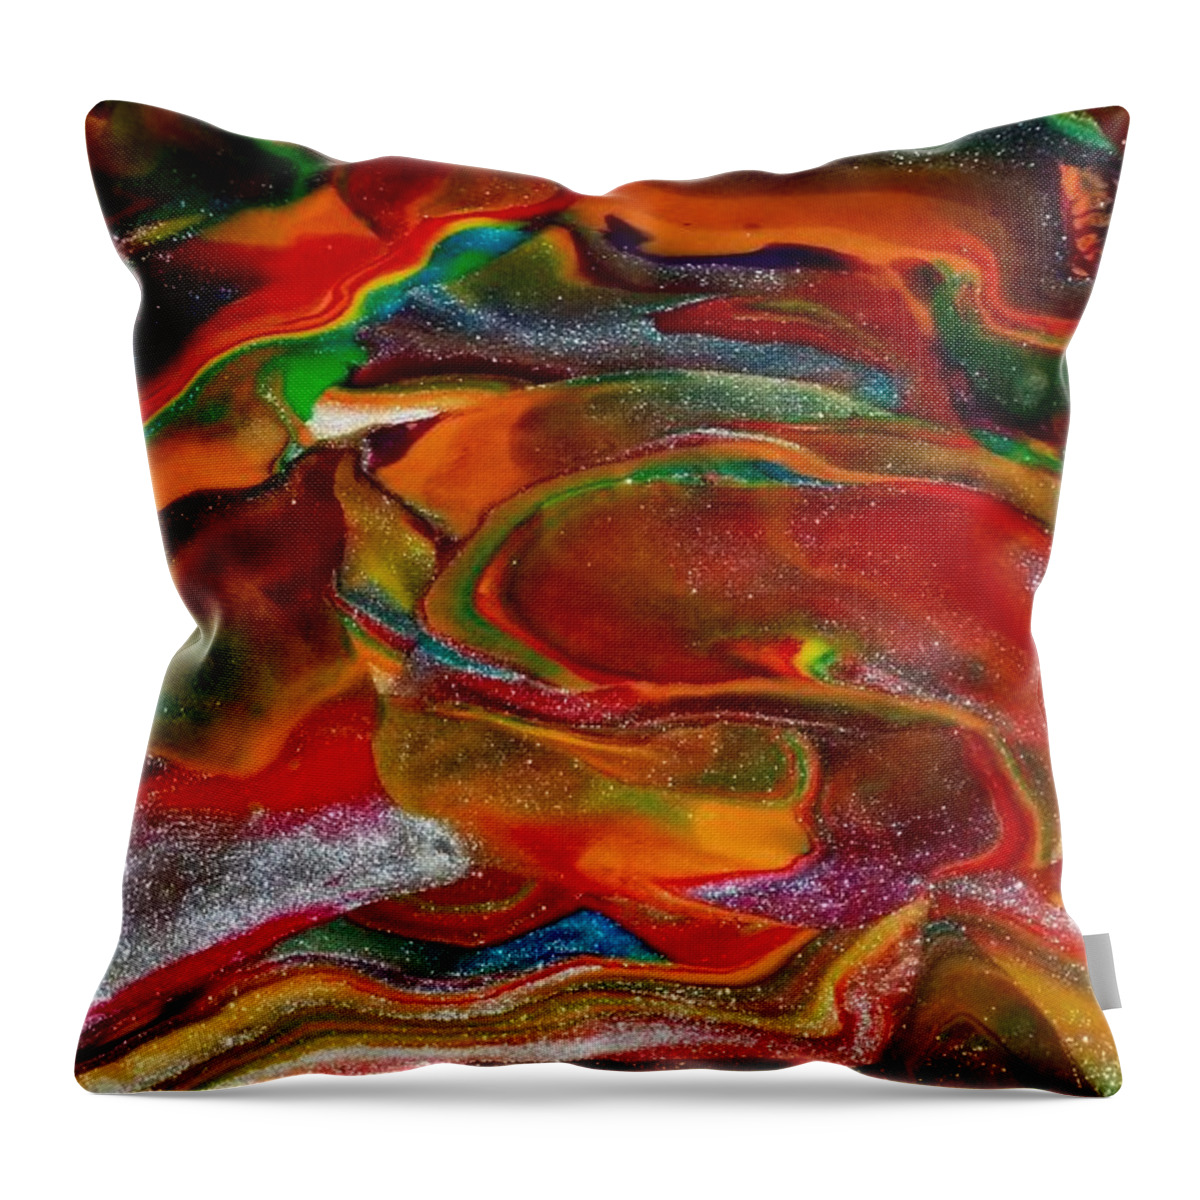 Abstract Throw Pillow featuring the mixed media Rainbow Blossom by Deborah Stanley